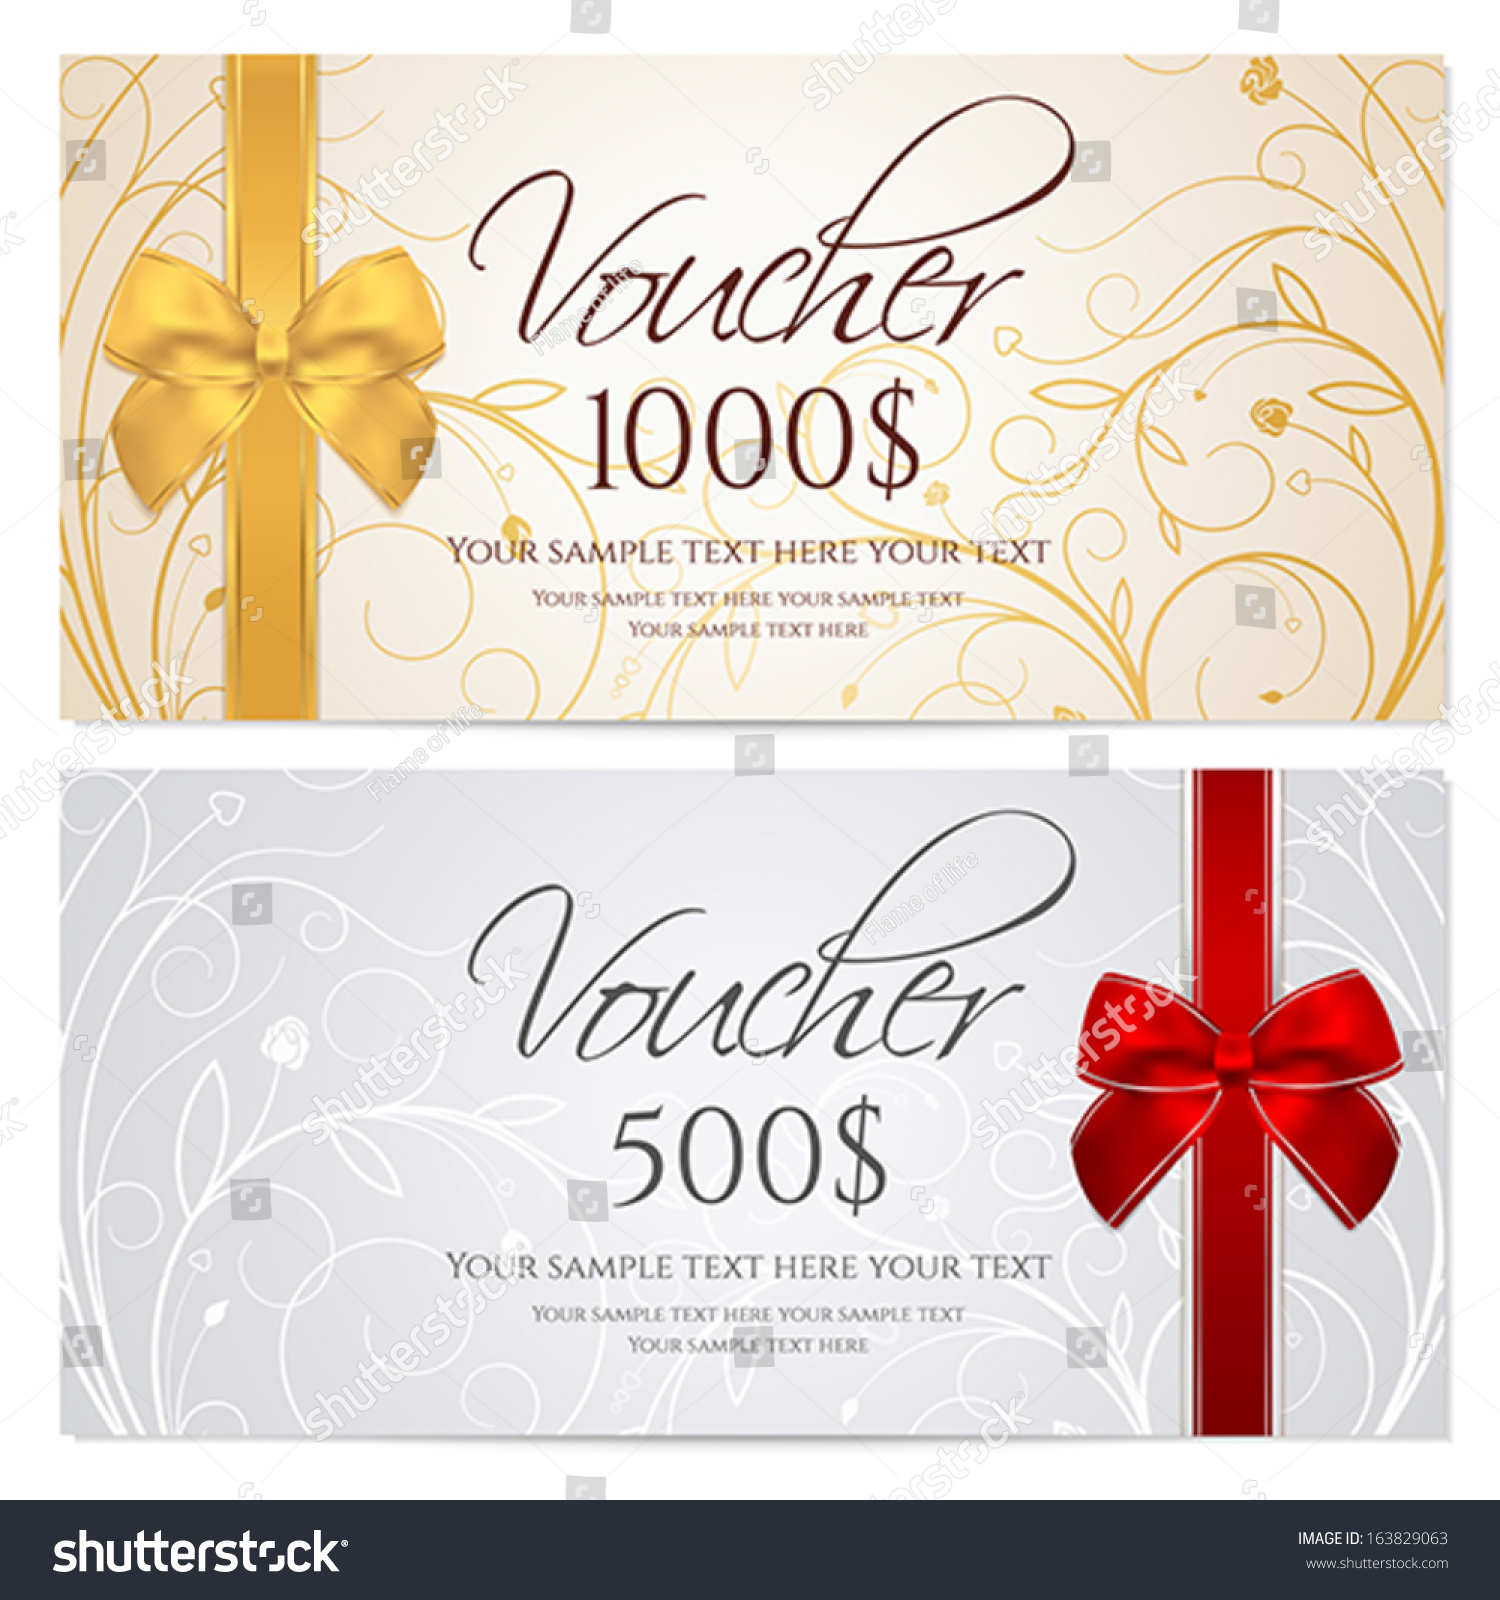 Voucher Gift Certificate Coupon Template Floral Stock Vector Throughout Scroll Certificate Templates